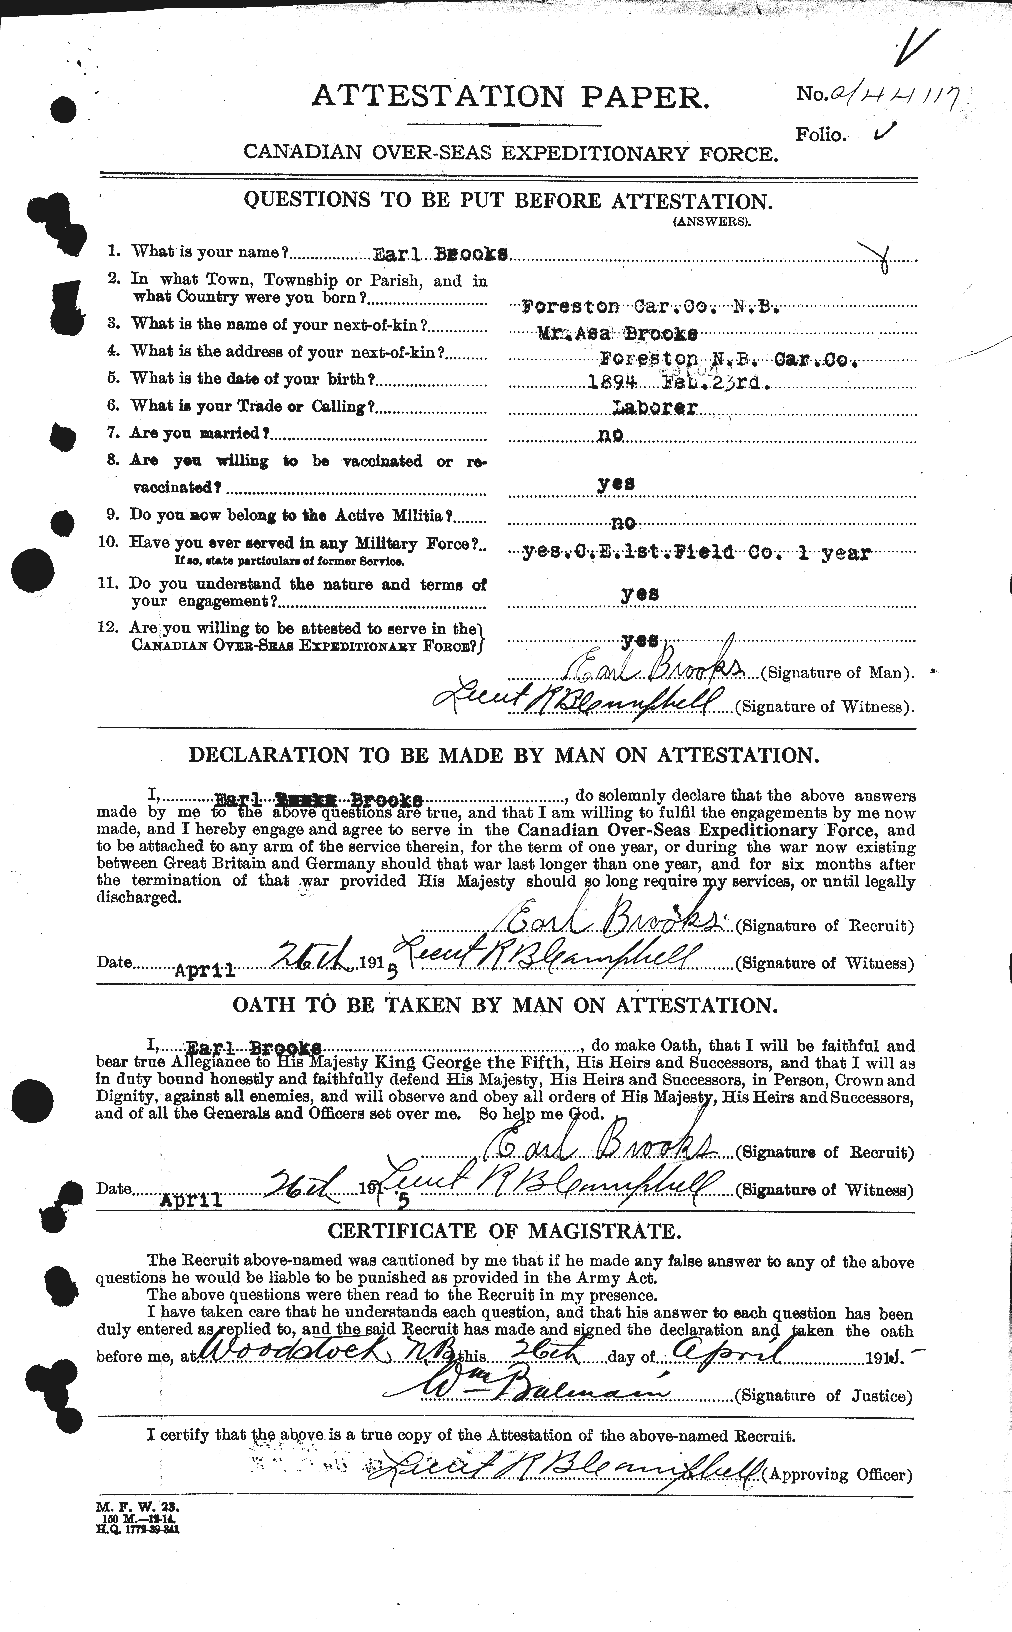 Personnel Records of the First World War - CEF 261559a